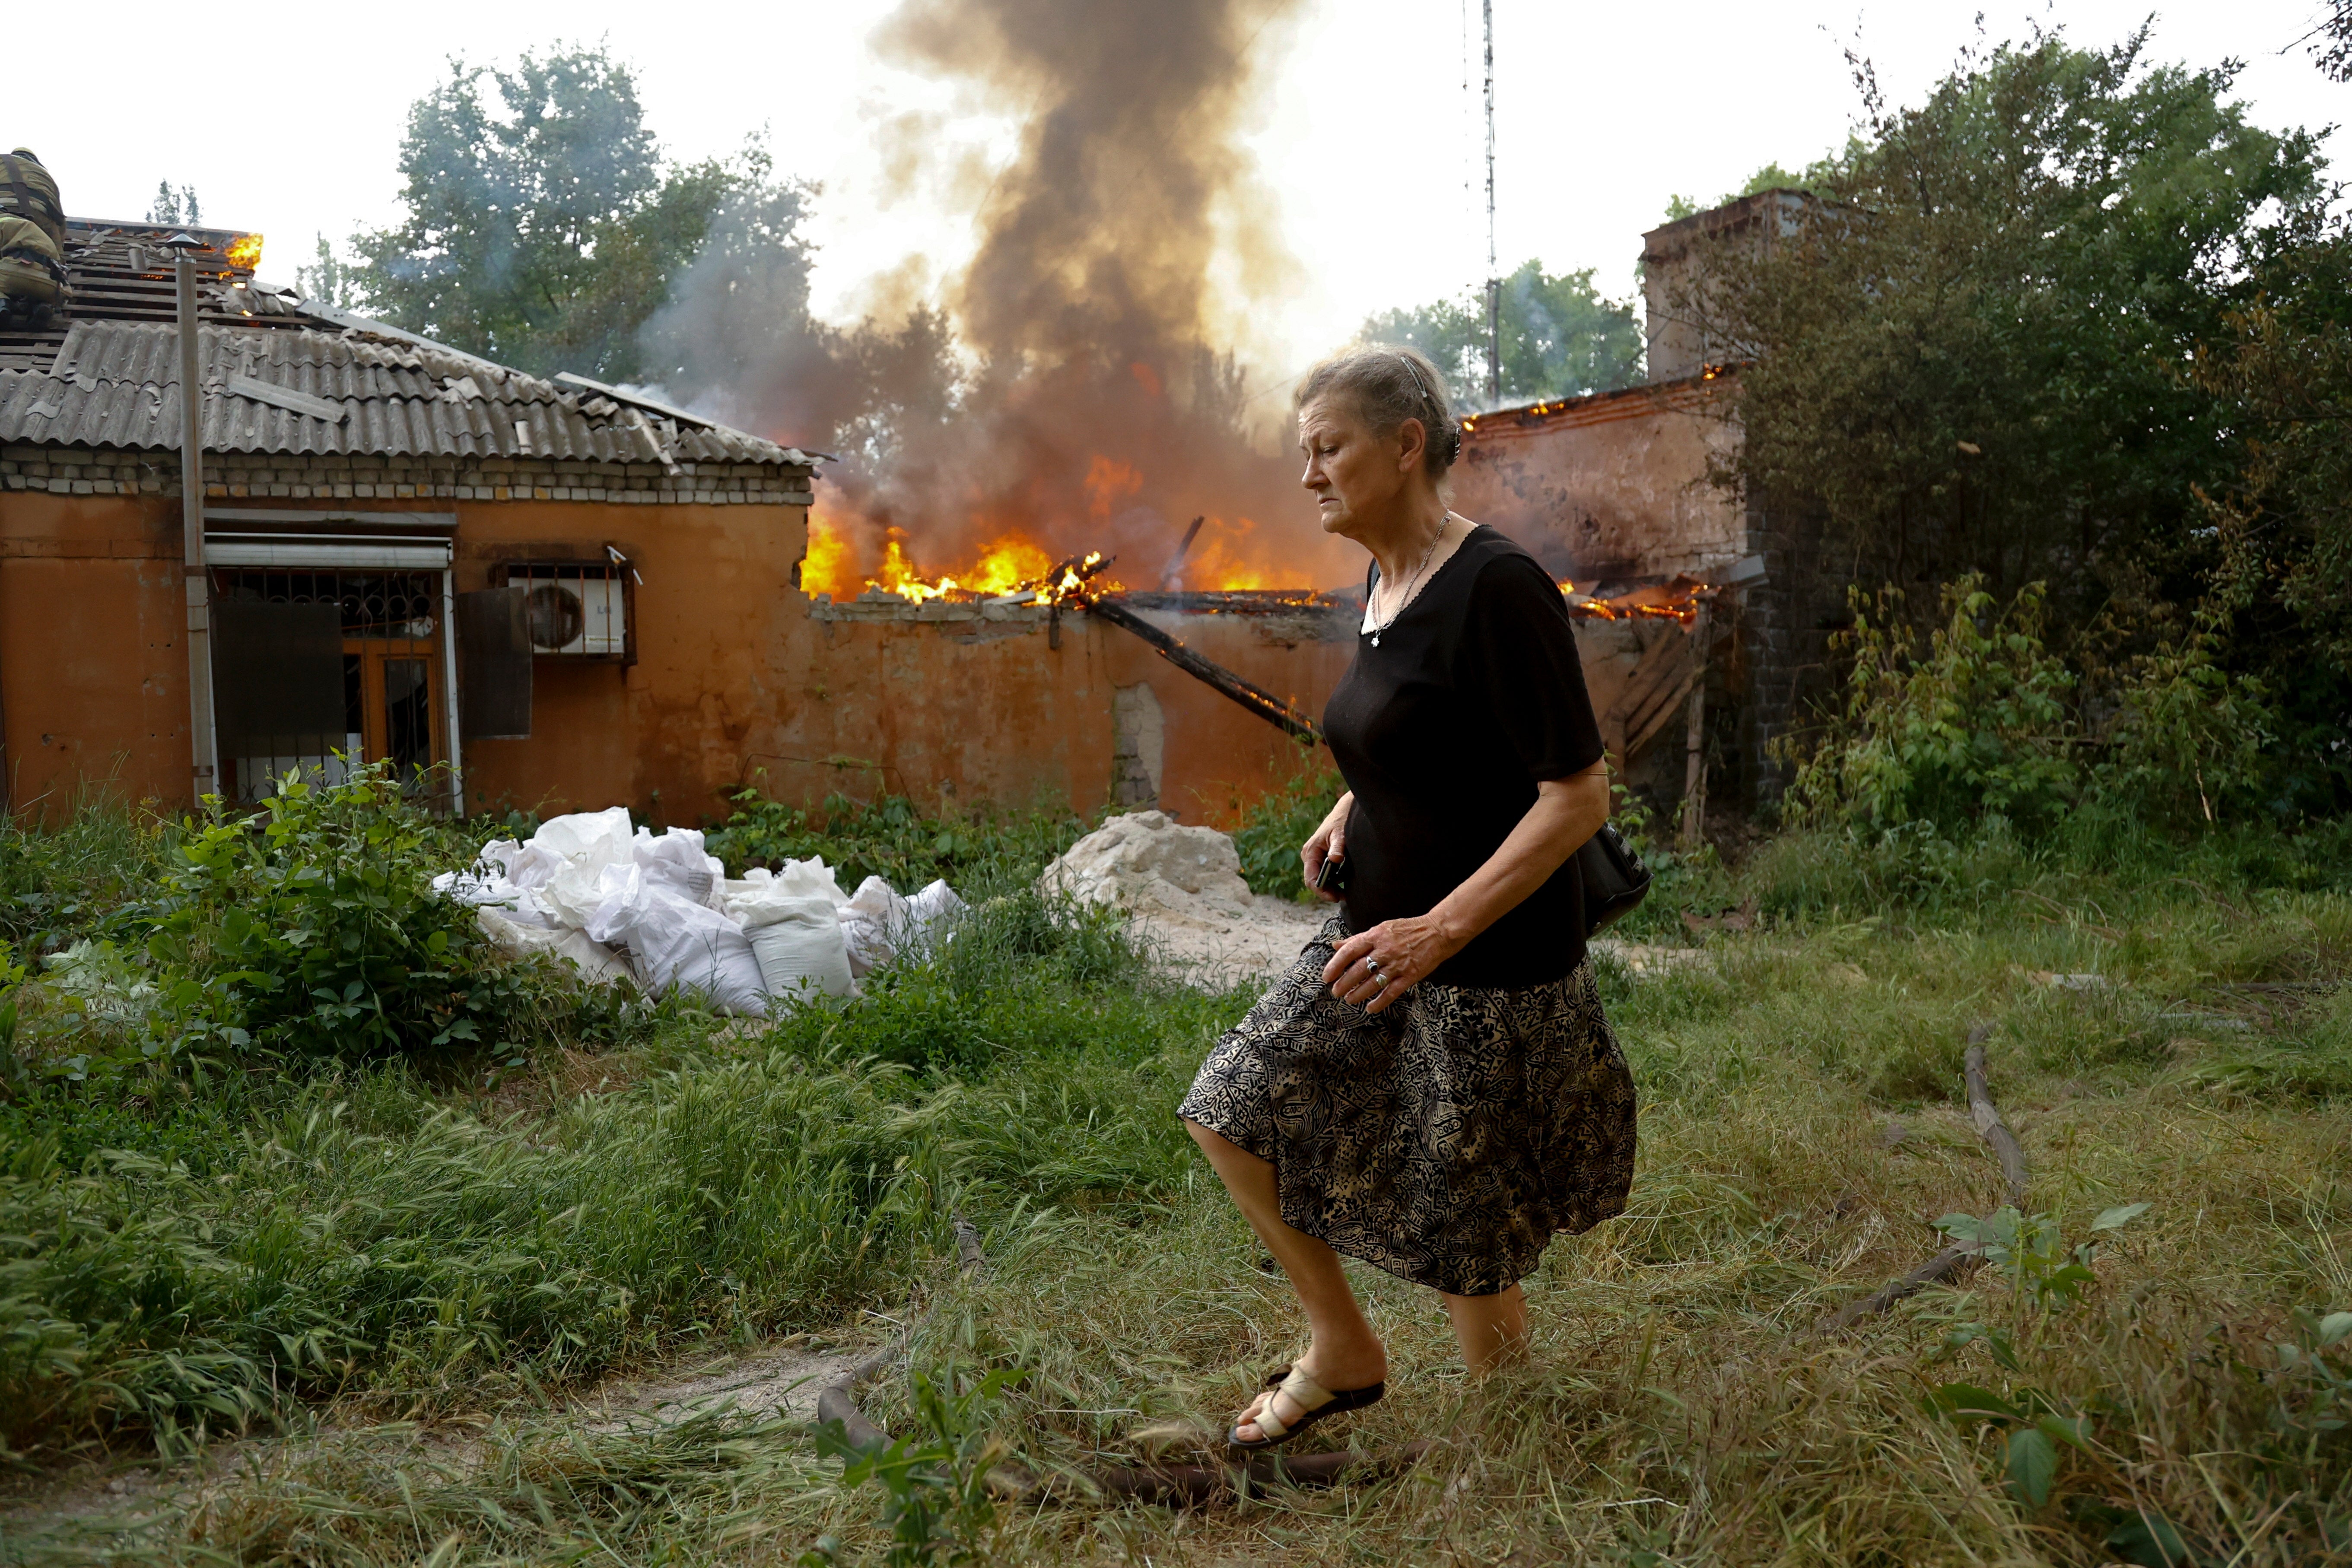 A woman runs from a house on fire after shelling in Donetsk